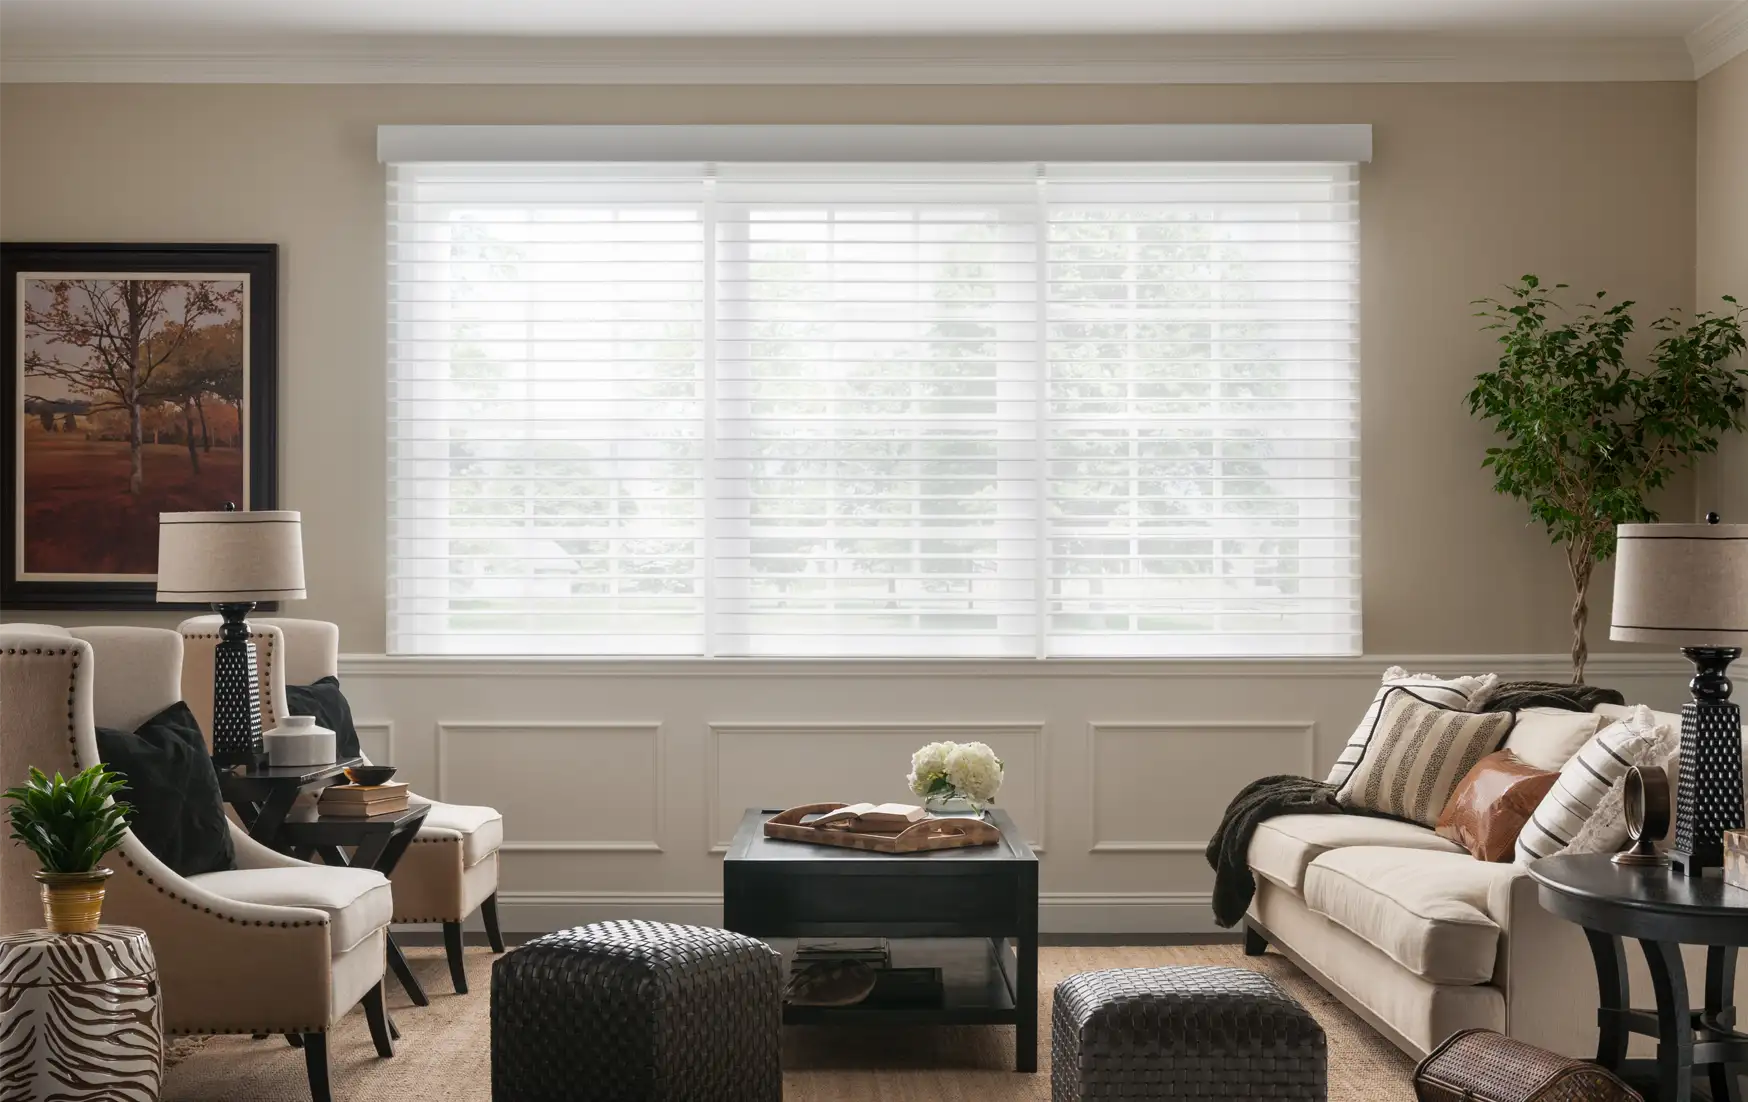 Automated horizontal sheer blinds filter sunlight while maintaining an outside view in living room setting.